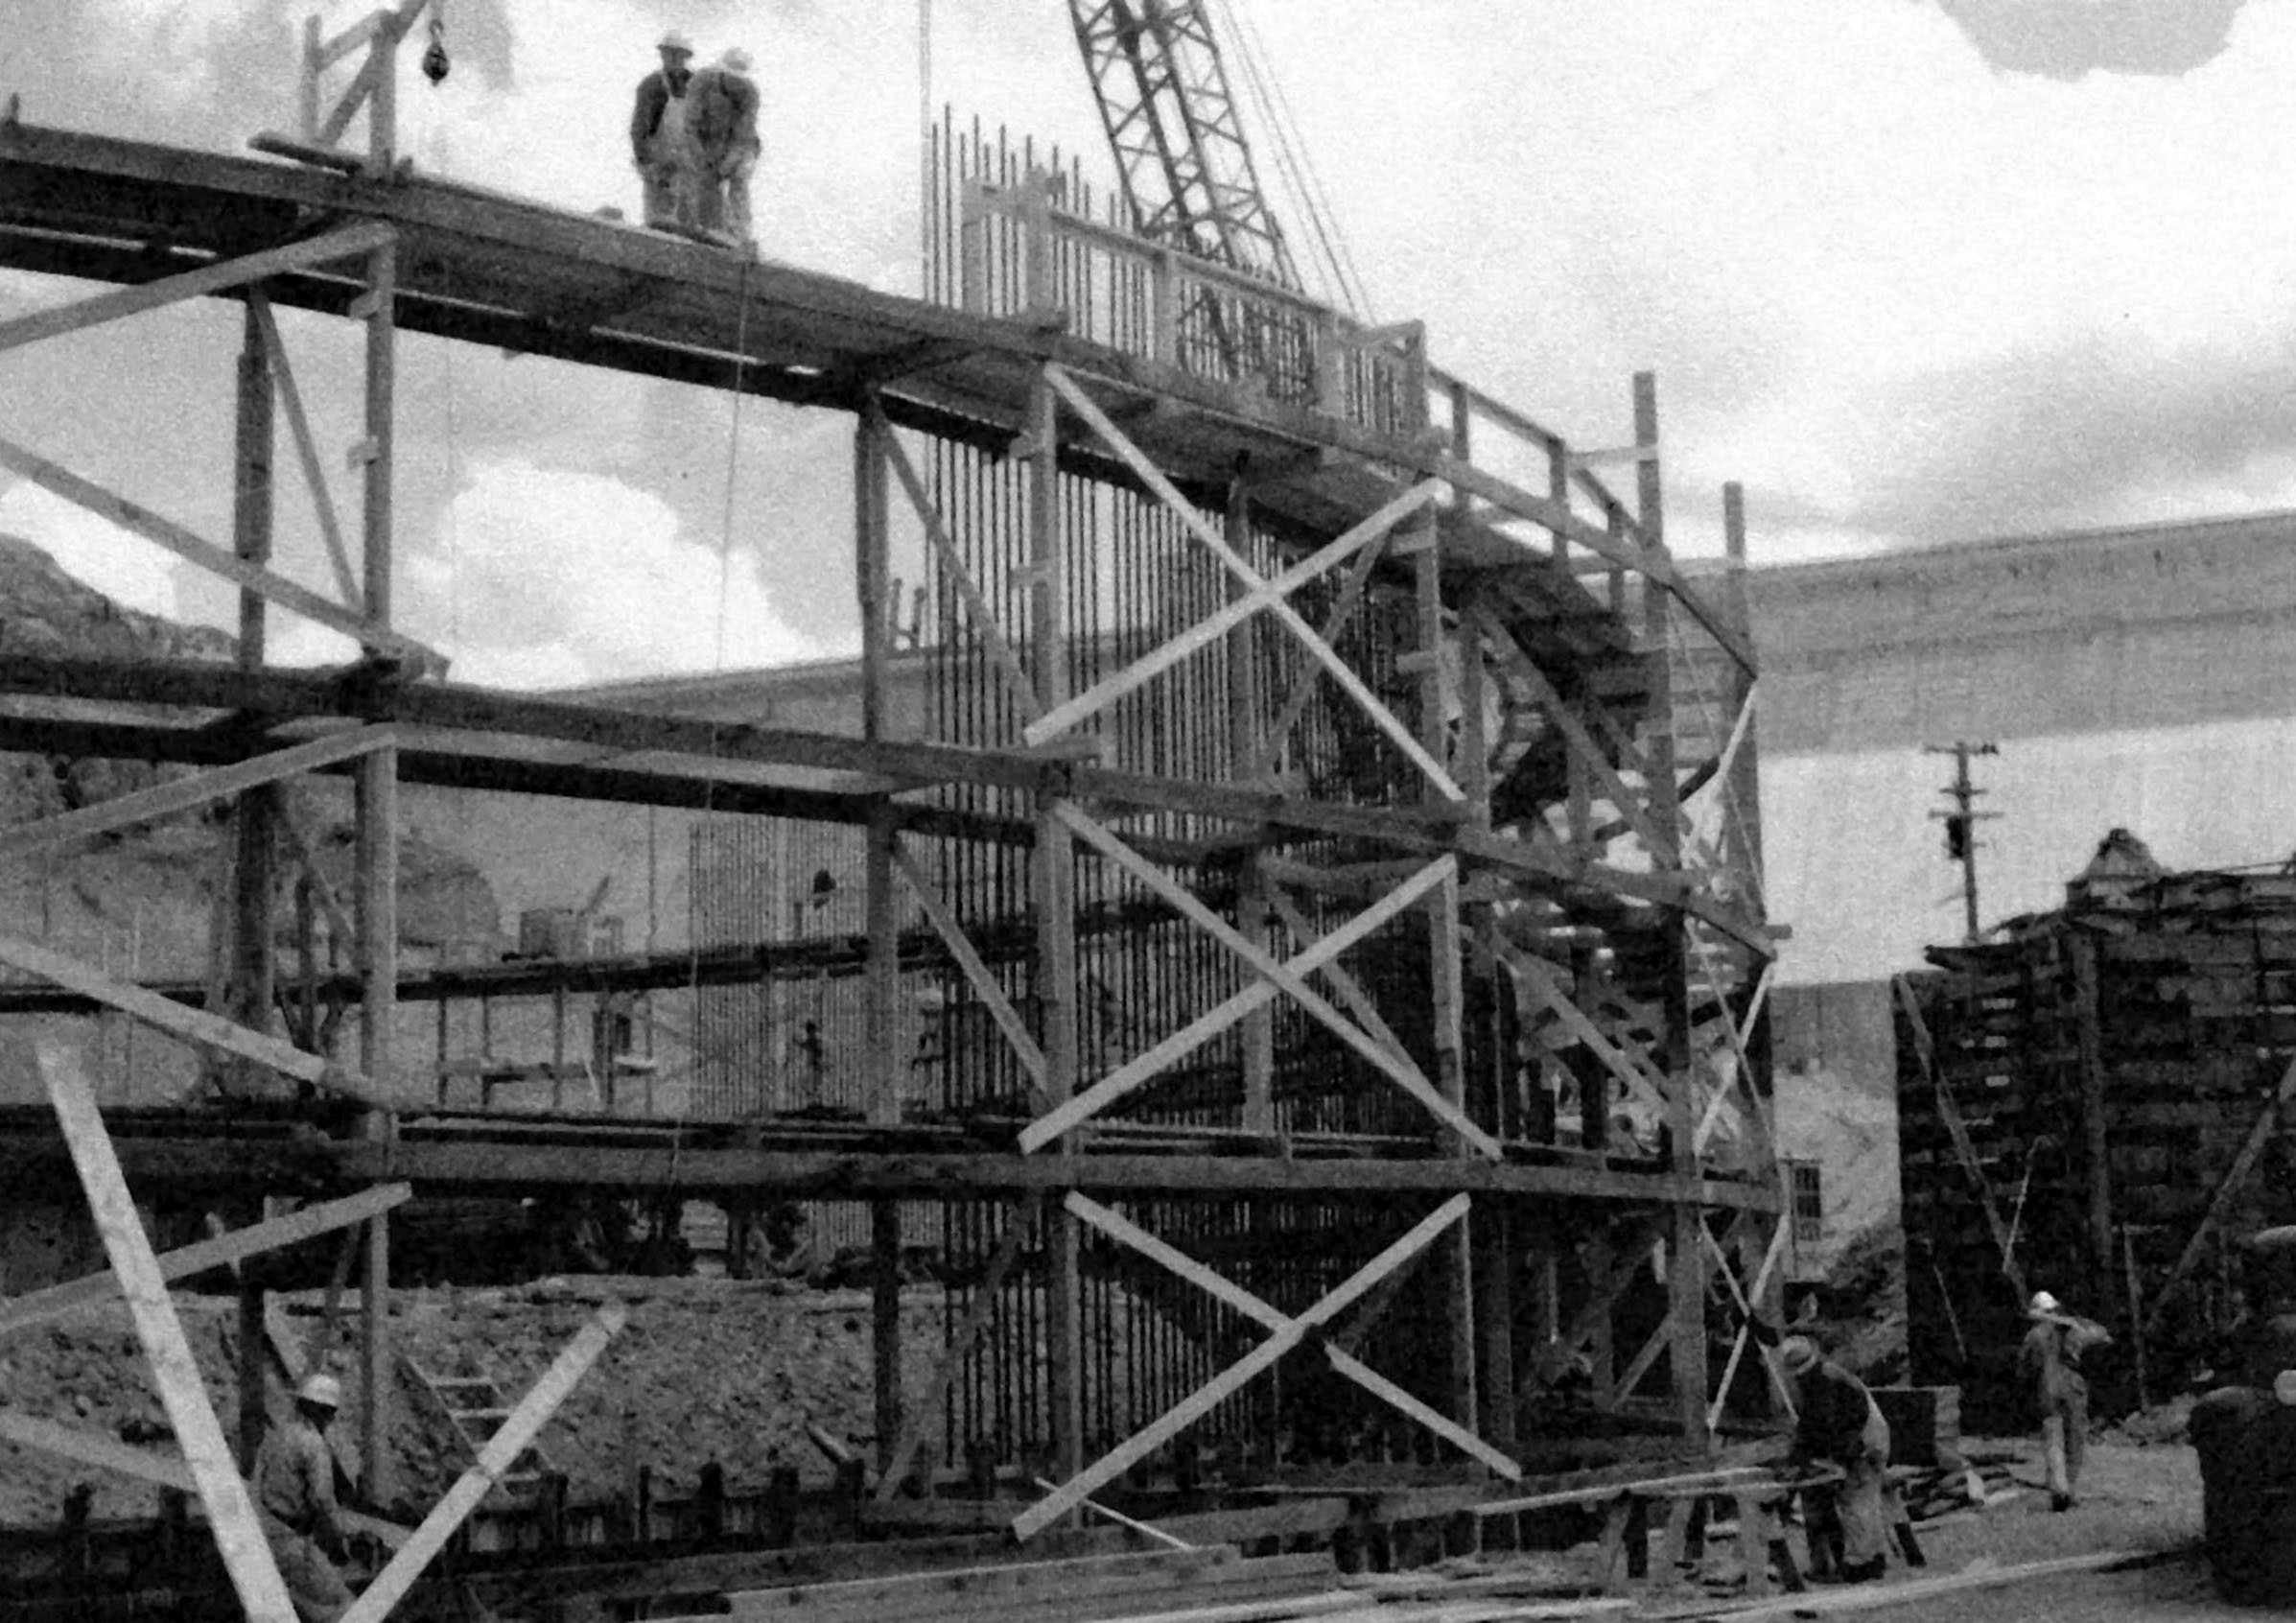 June 2, 1944. Placing re-inforcing steel prior to pouring the concrete at the caison drydock at Grand Coulee Dam.